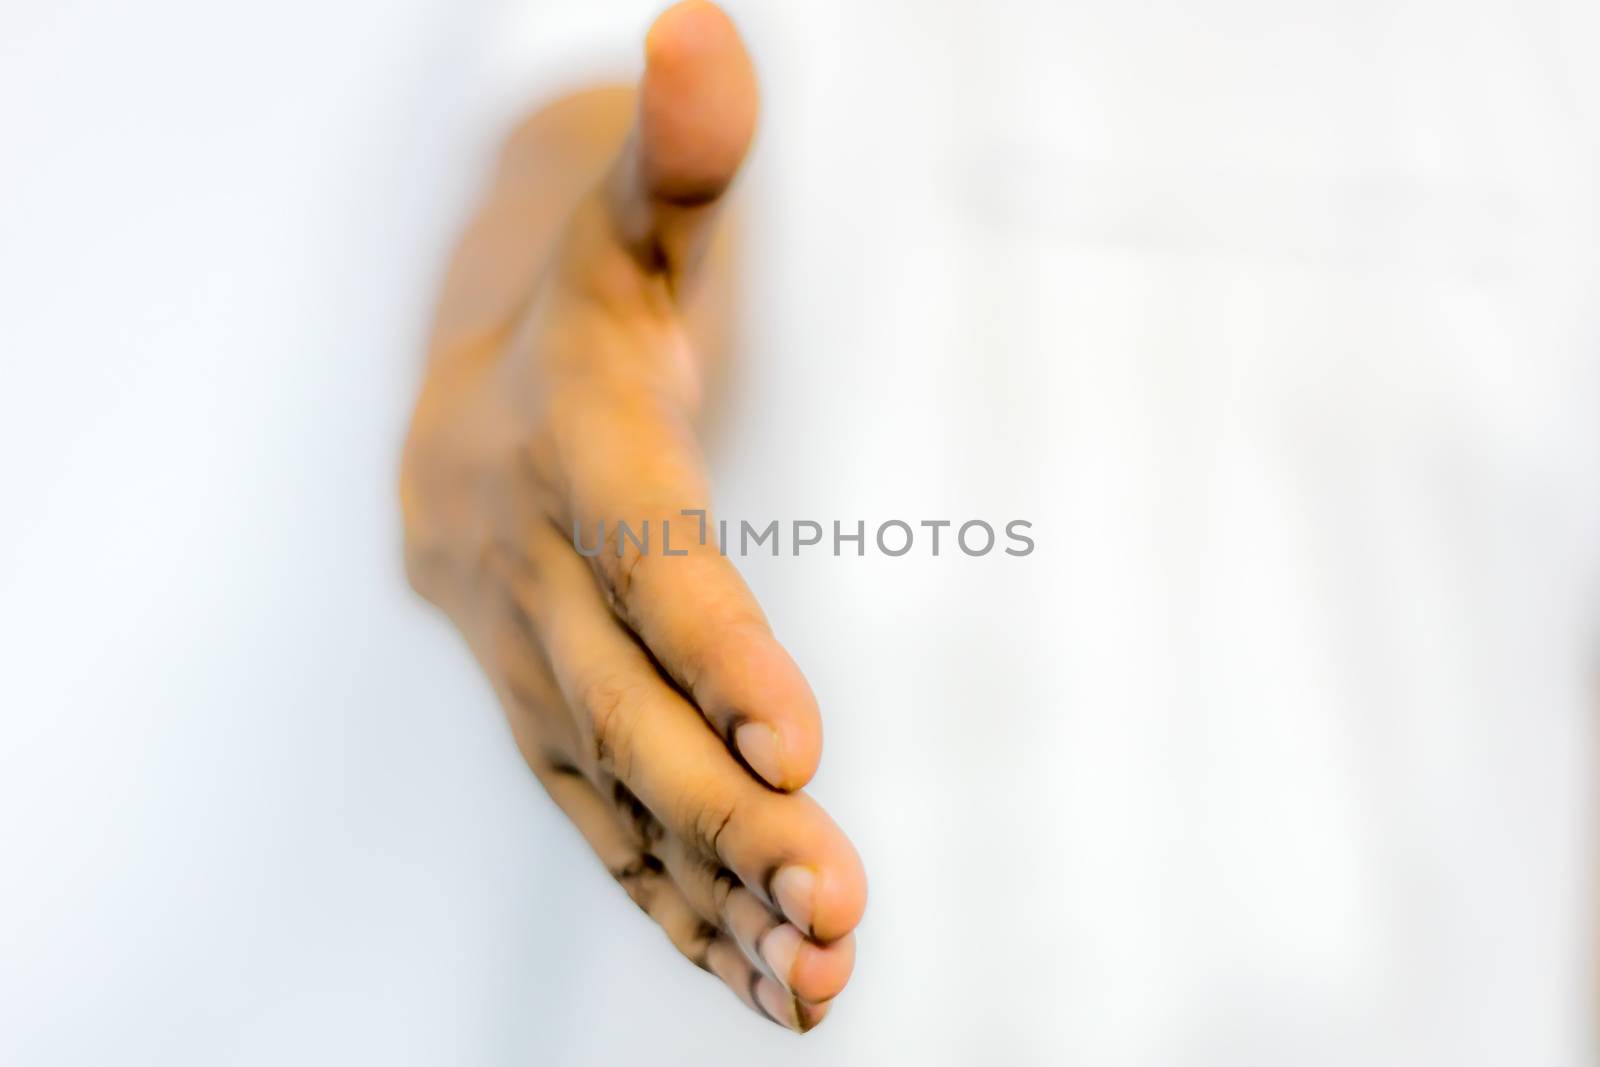 Close up businessmen hands stretched out for handshaking. Businessman or salesman, stretches his hand to conclude a business deal. Partners welcoming after negotiation of contract or agreement complete.